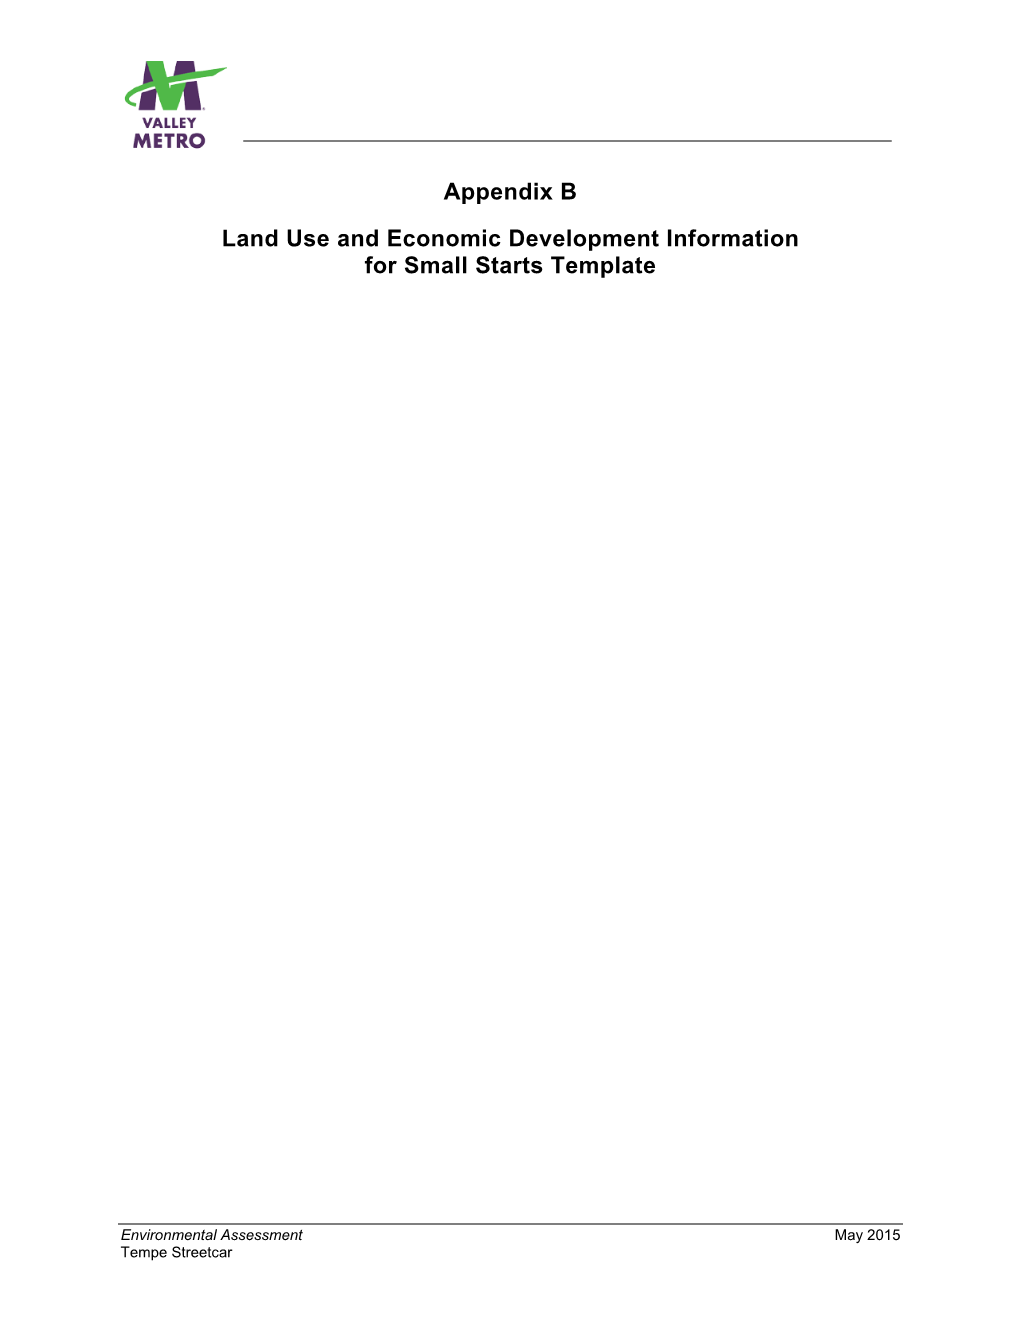 Appendix B Land Use and Economic Development Information for Small Starts Template